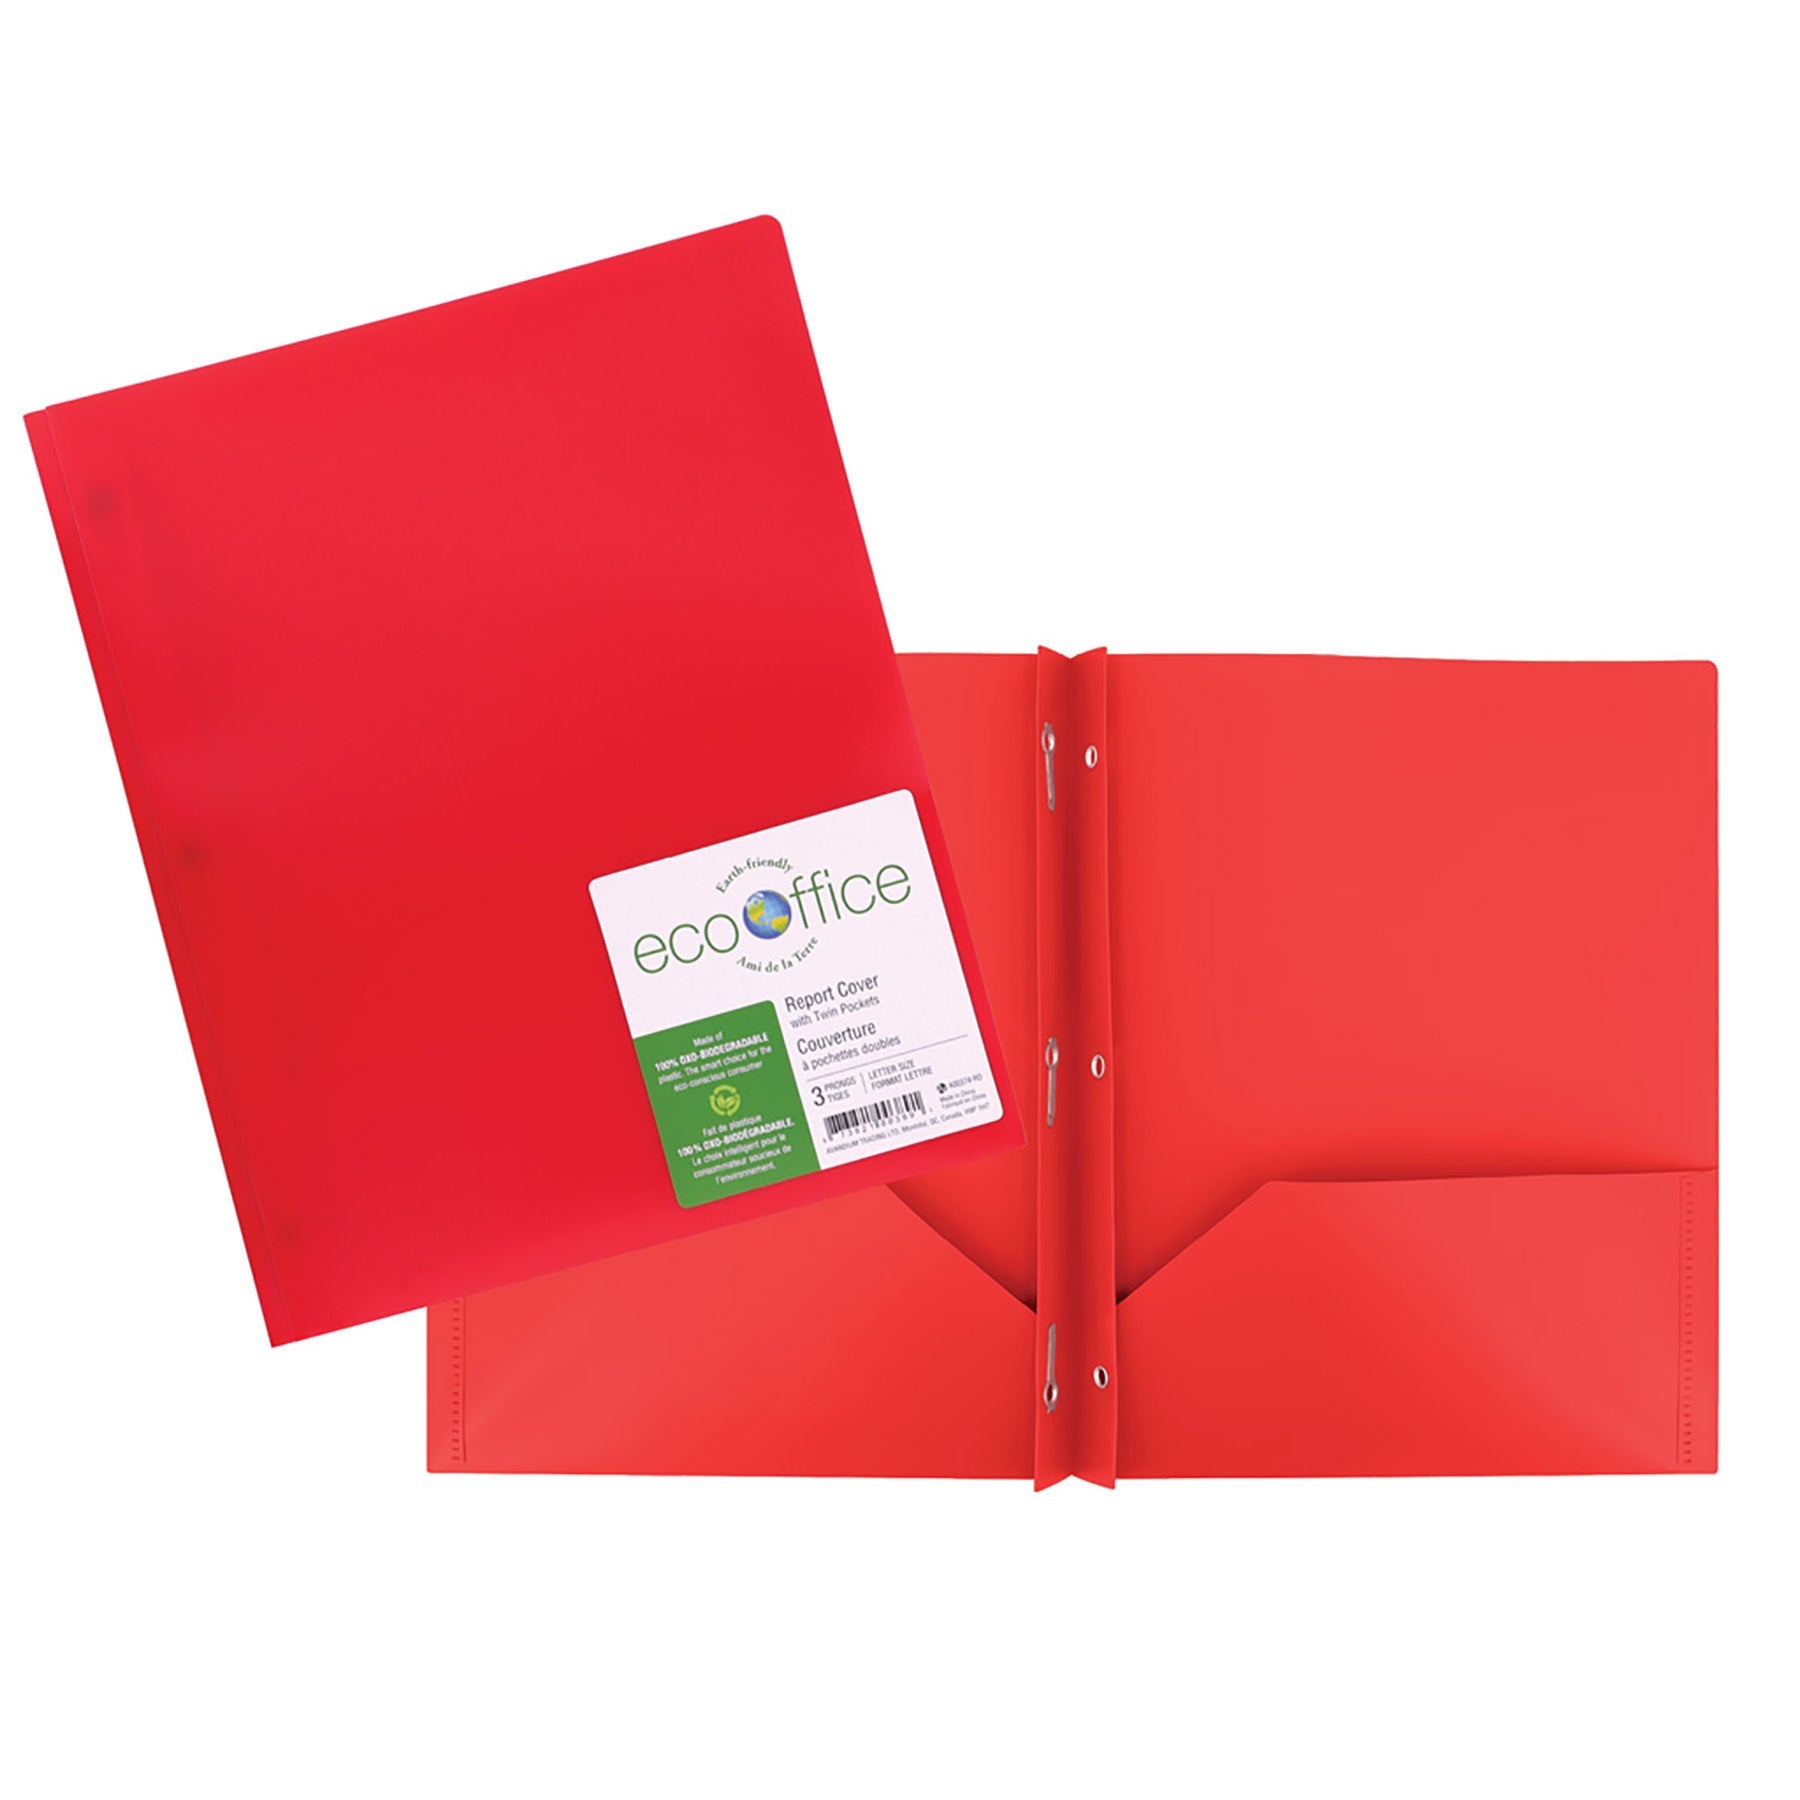 EcoOffice 3-Prong Report Cover 2 Pockets Red Plastic 11.25x9.25in